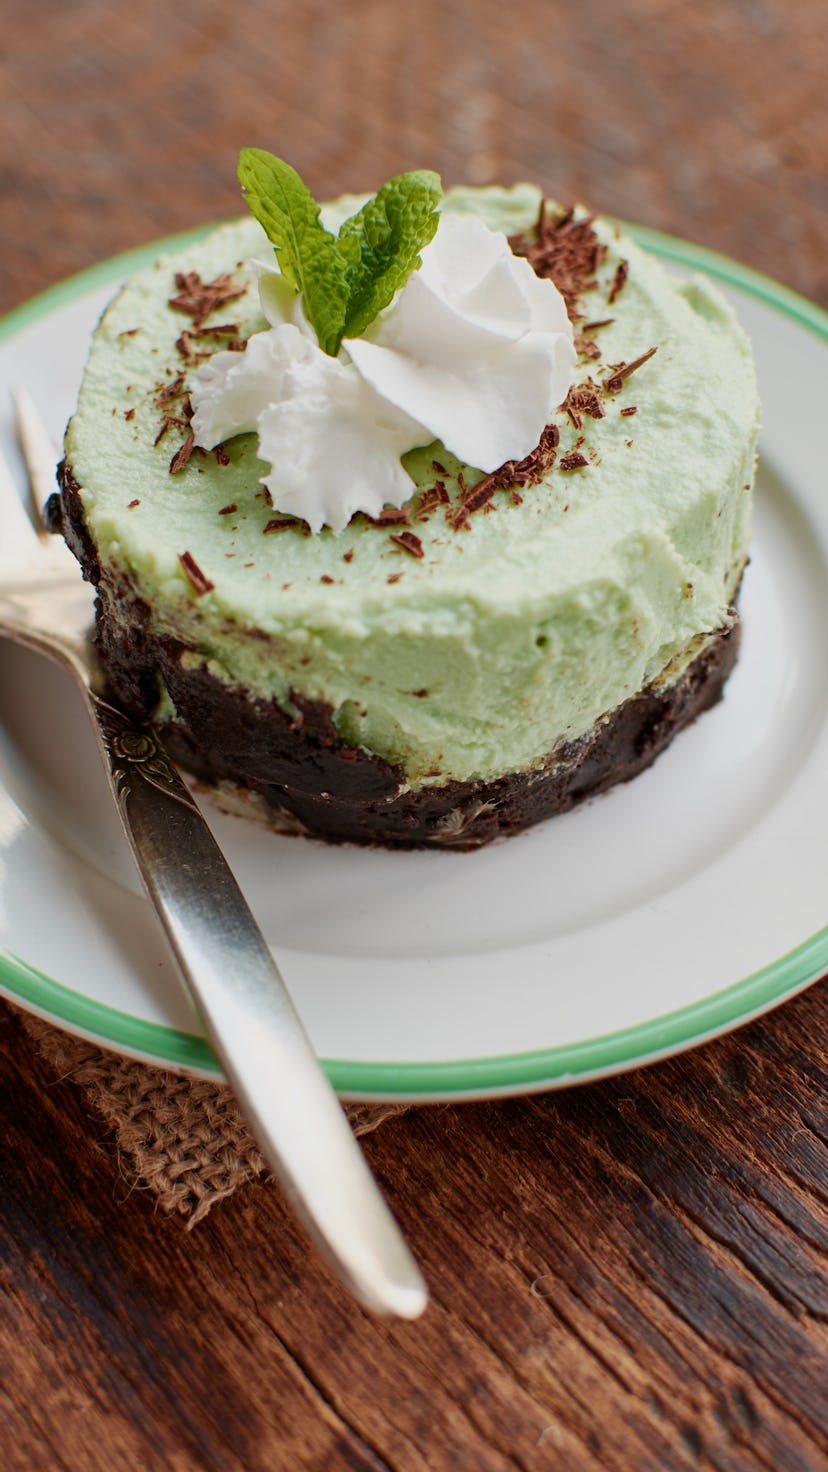 Use green food coloring to make frosting for a cake.